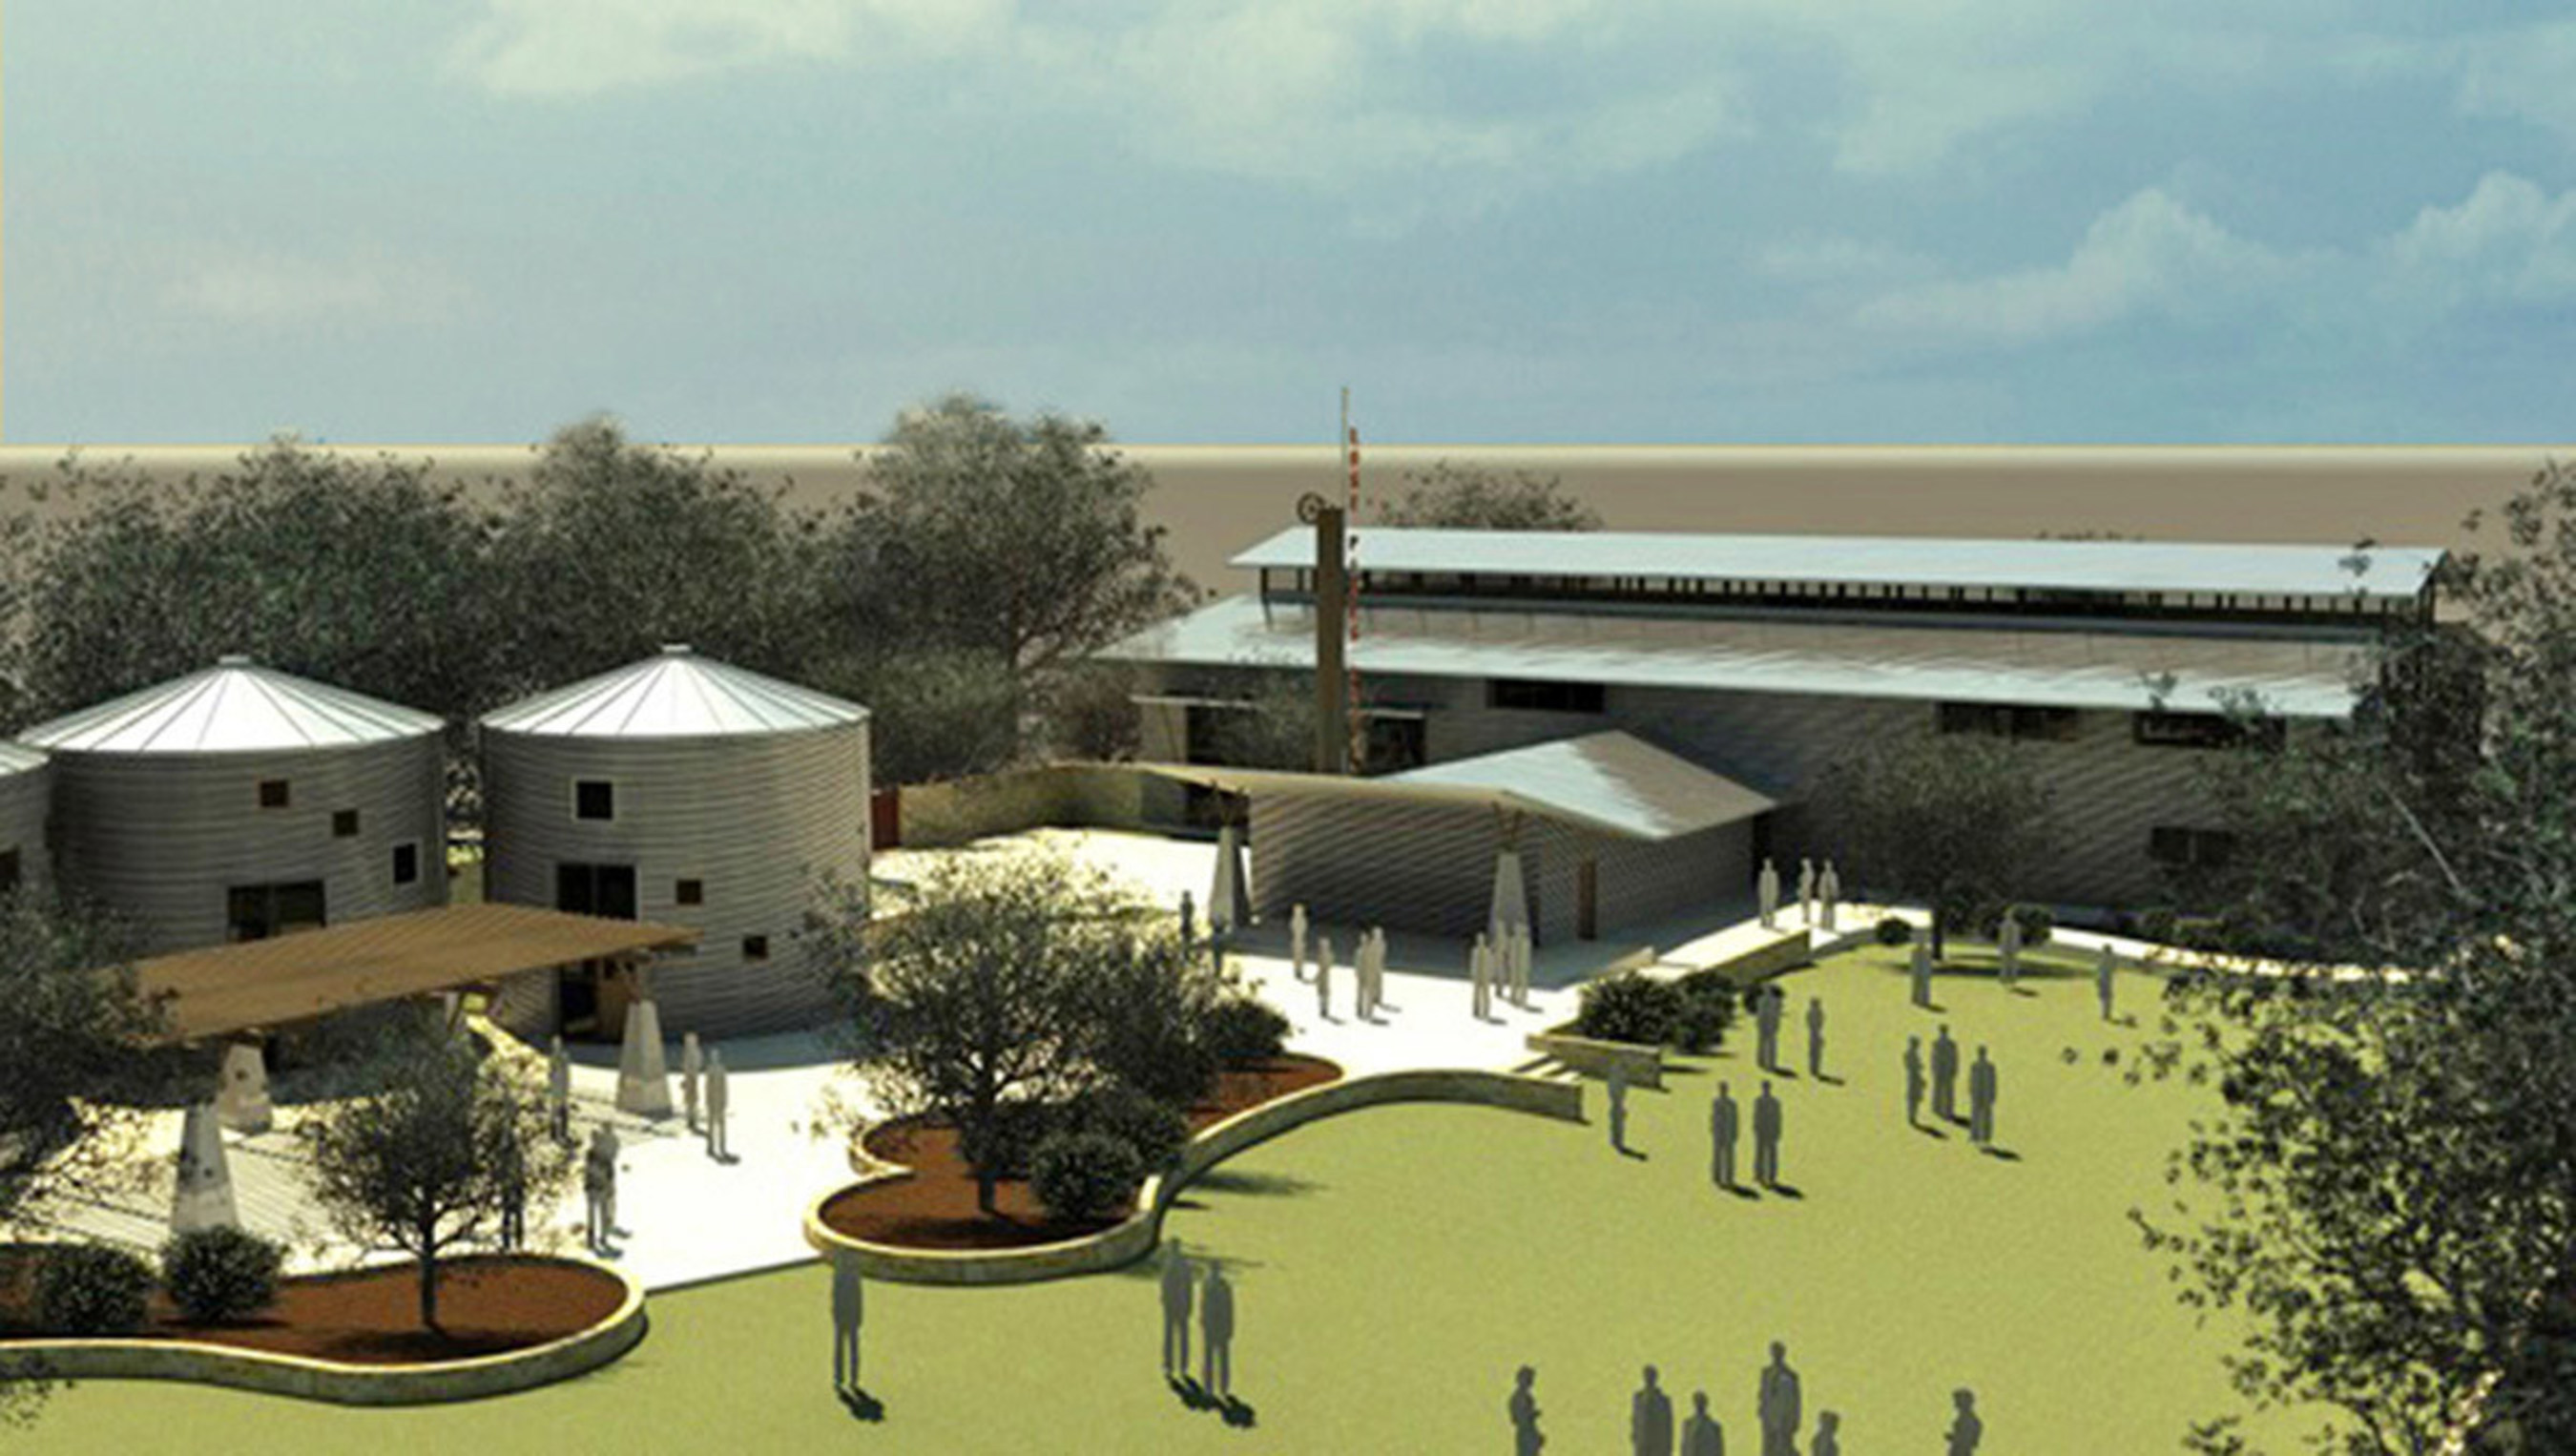 The Lost Pines Art Center and Commemorative Sculpture Garden includes a new 12,000-square-foot art center with state-of-the-art exhibit space, classrooms, a coffee and wine bistro and retail space for art-related businesses. Four 100-year-old silos, part of the historic Powell Cotton Seed Mill, will be used as studios - one each for pottery and glass, one for metal, wood and stone carving, and the fourth silo will be an artist in residence apartment.